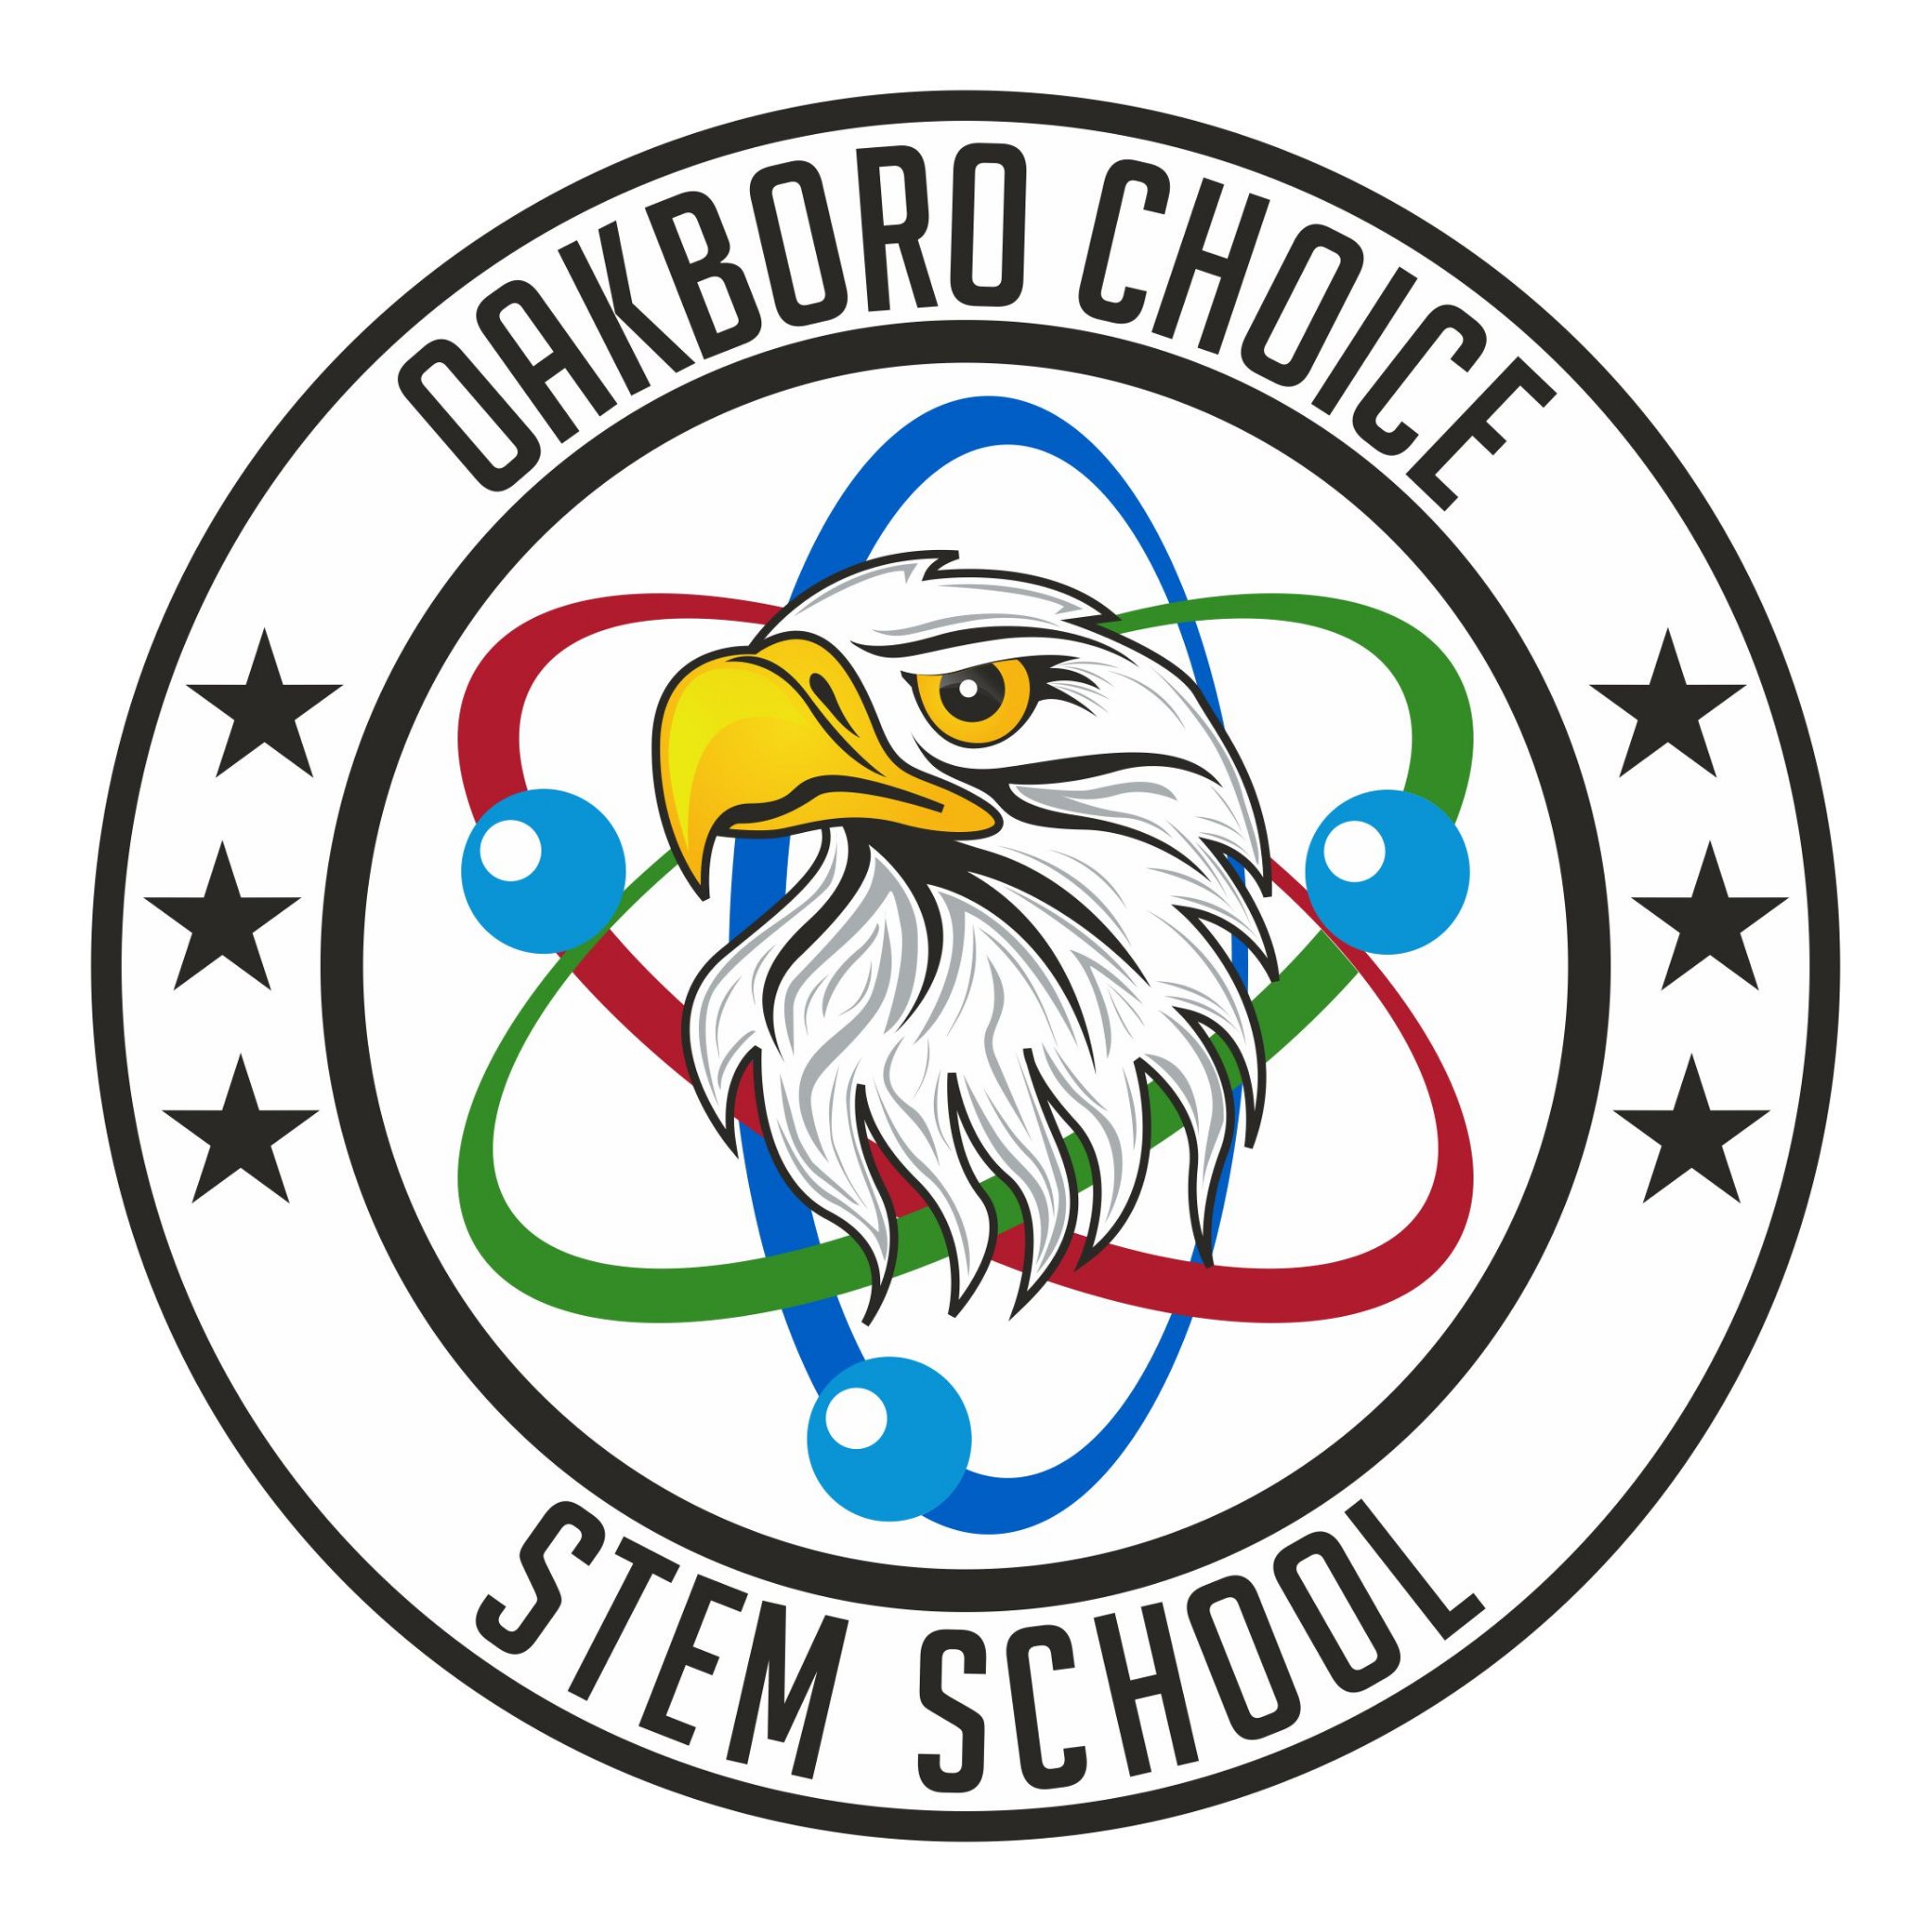 Oakboro Choice STEM is a K-8 STEM School of Distinction located in Stanly County, NC